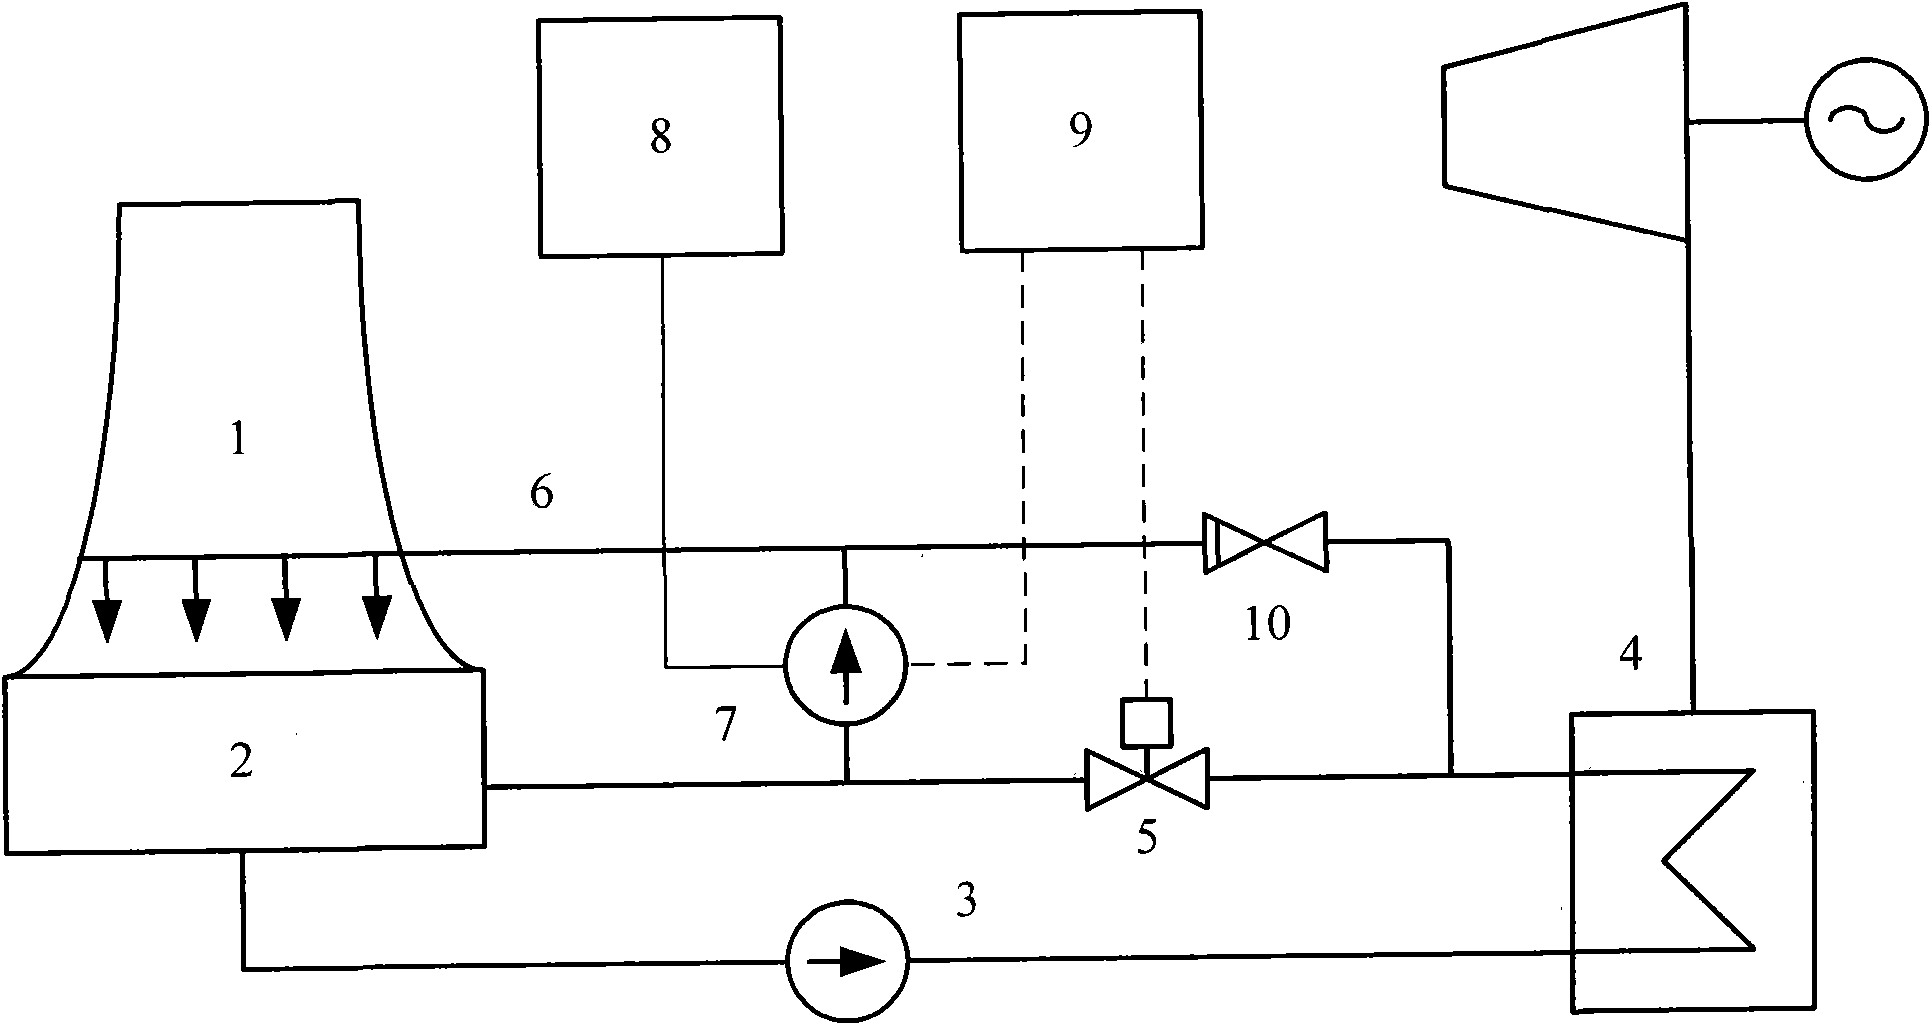 Circulating cooling water solar energy saving and controlling device for coal-based power plant